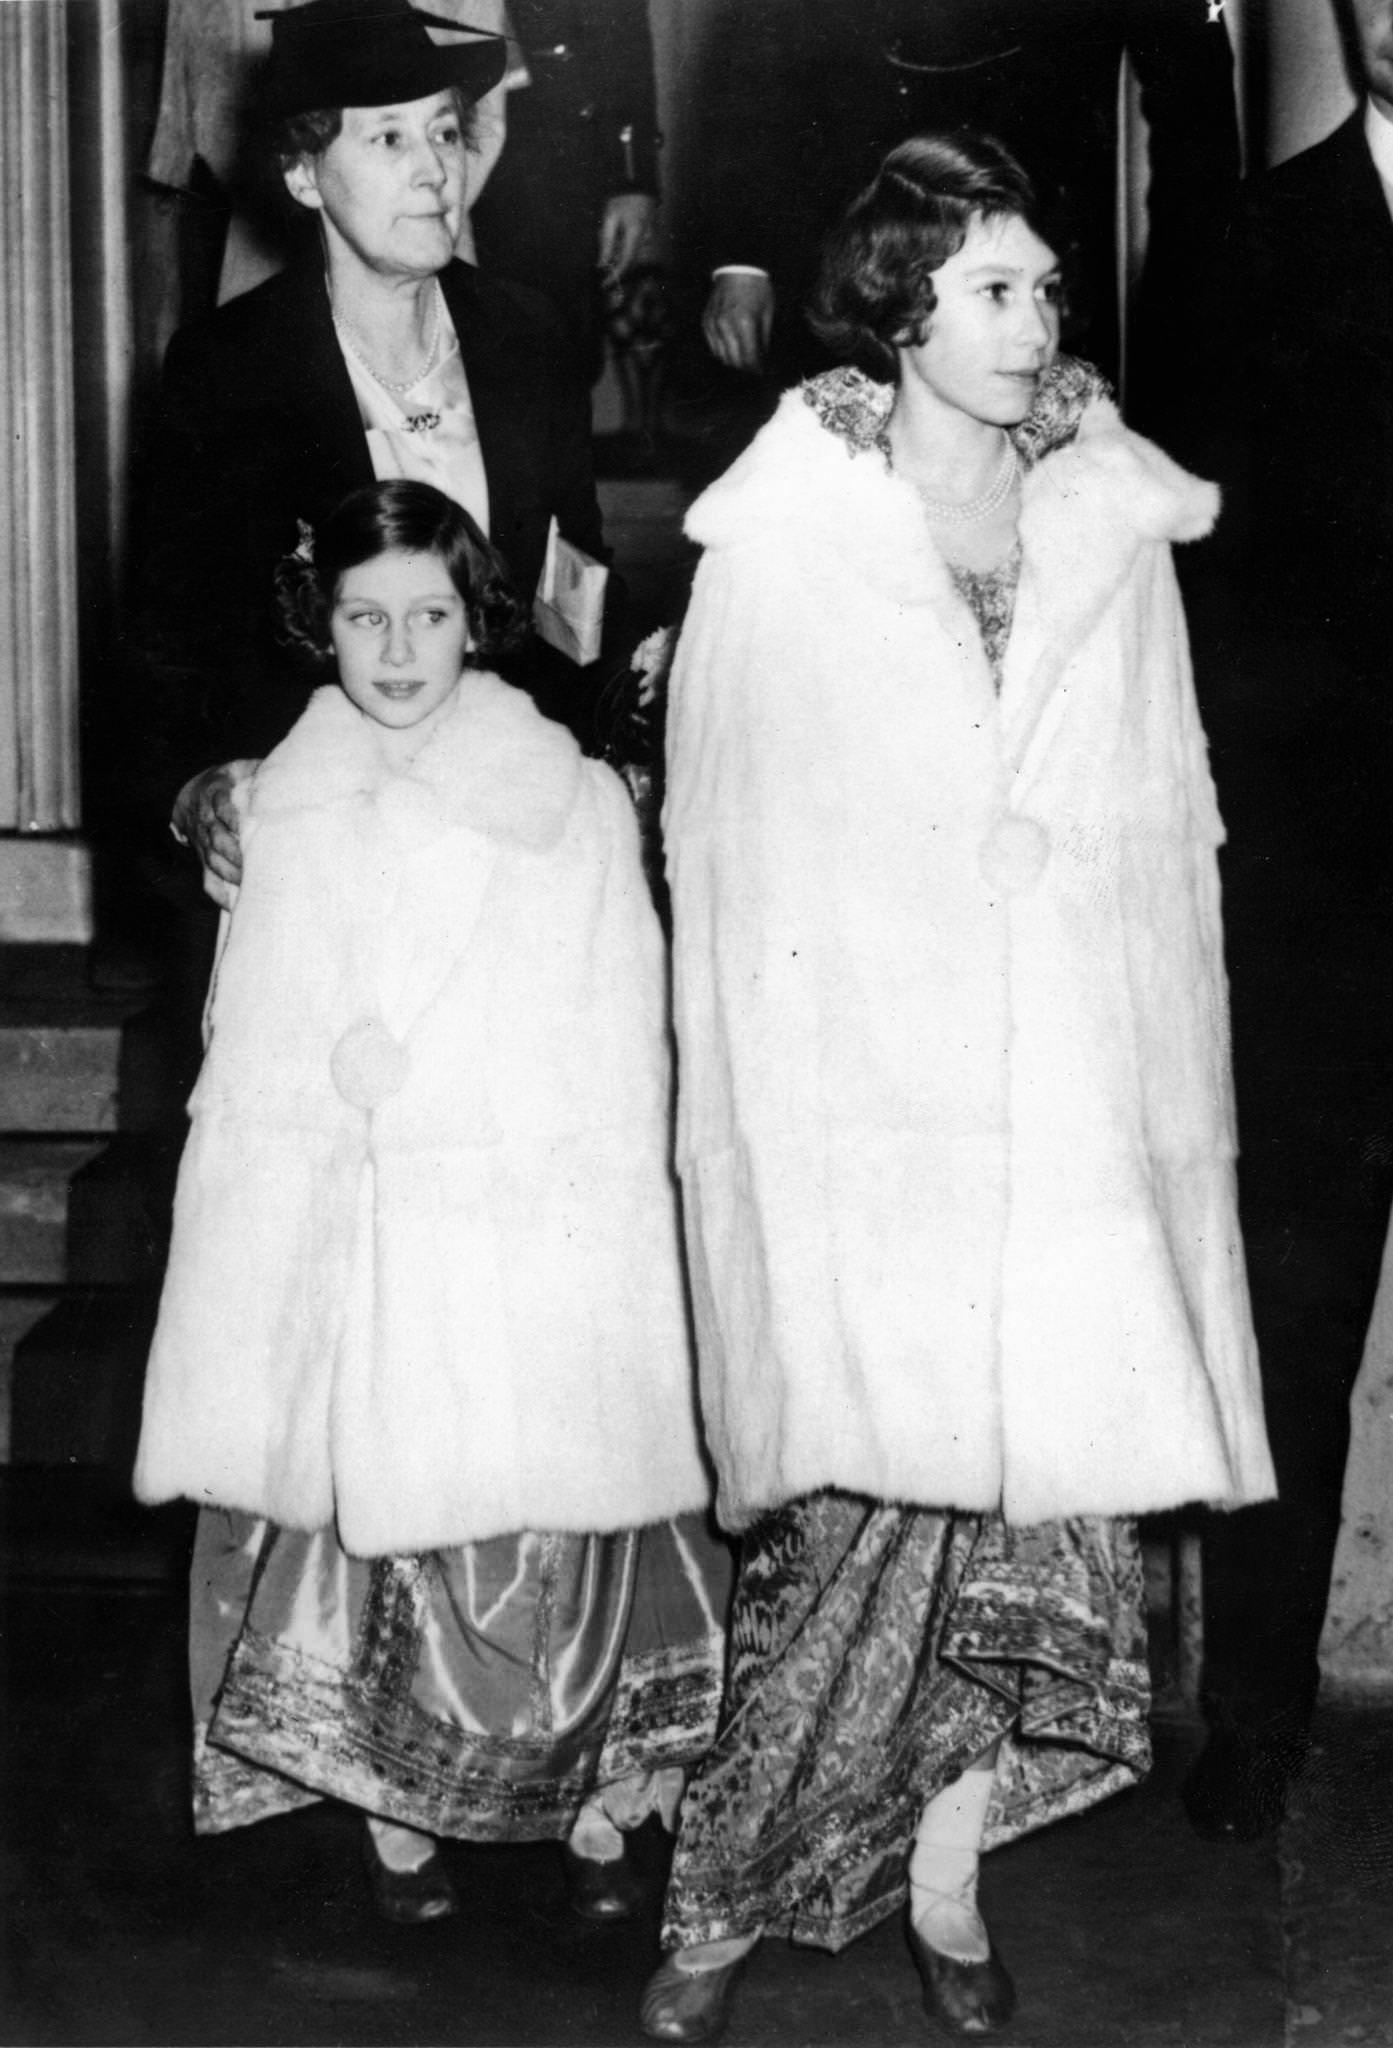 The English princesses Elizabeth and Margaret in London after a children's party, March 7th 1939.